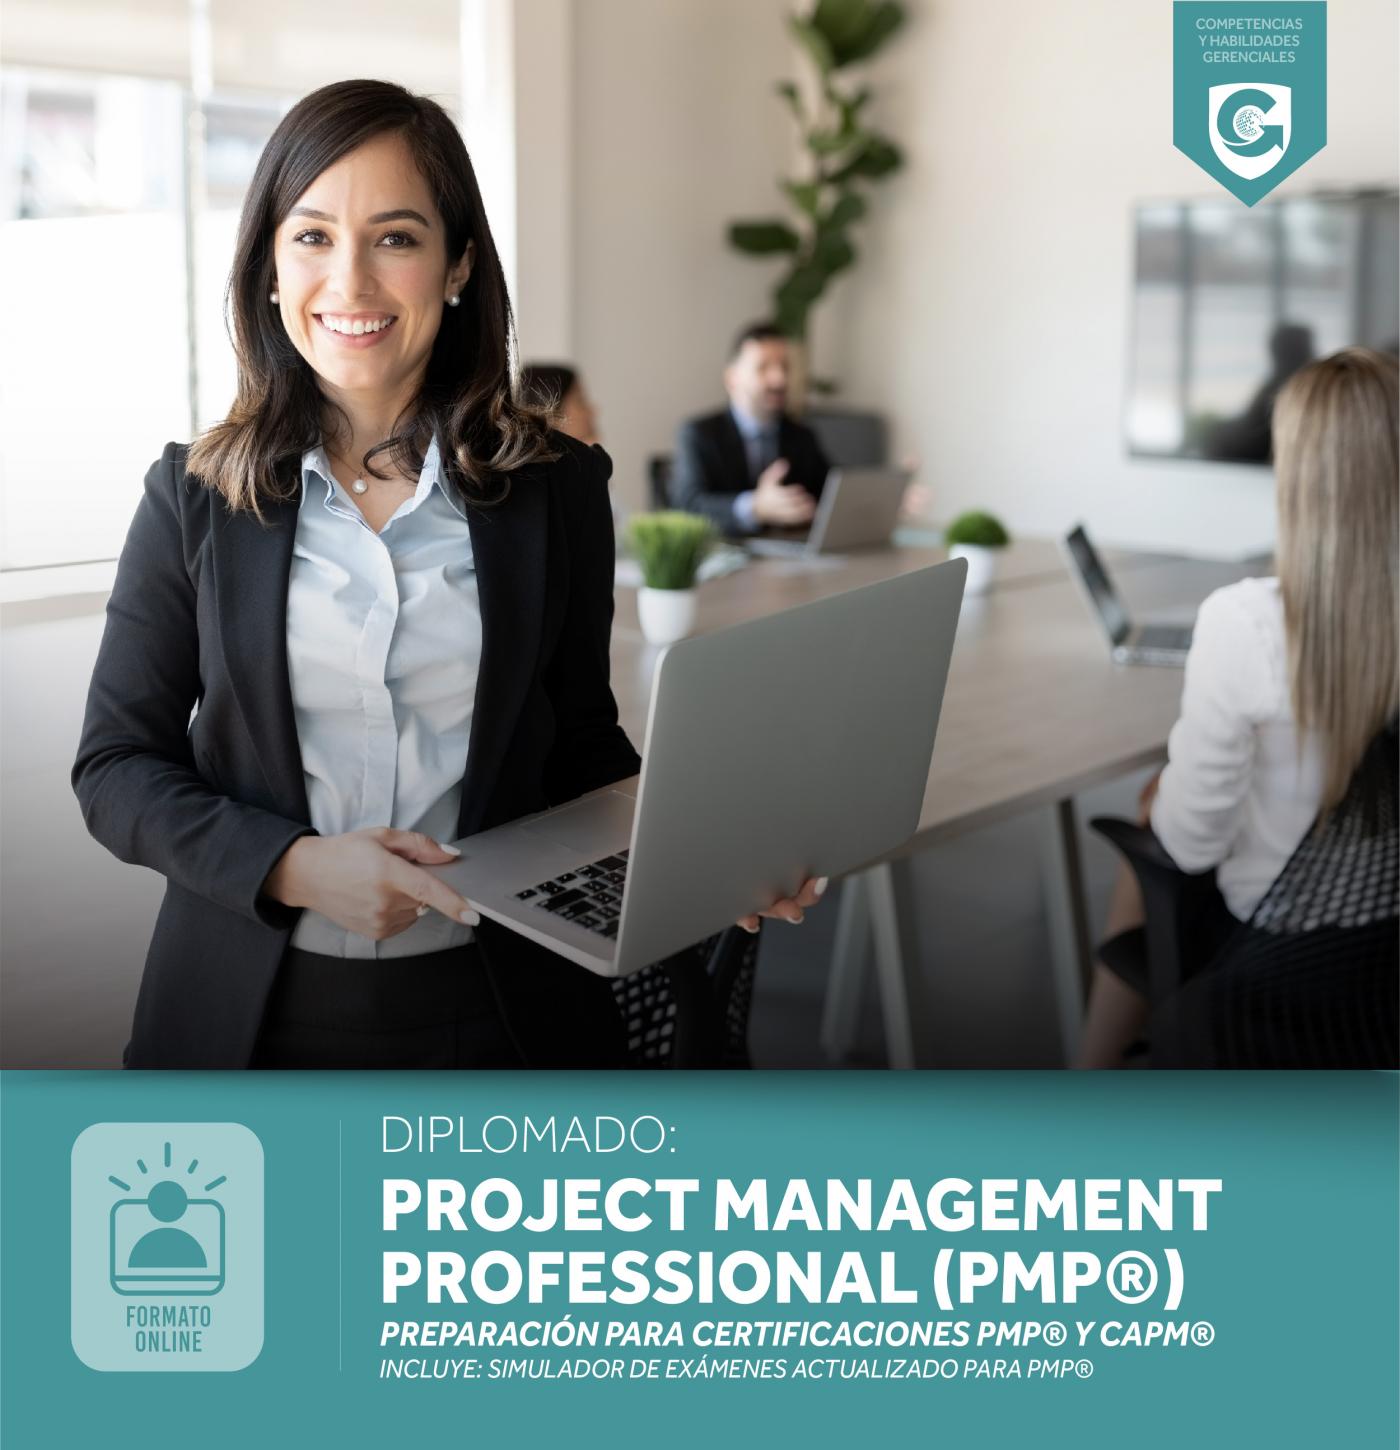 Diplomado PROJECT MANAGEMENT PROFESSIONAL